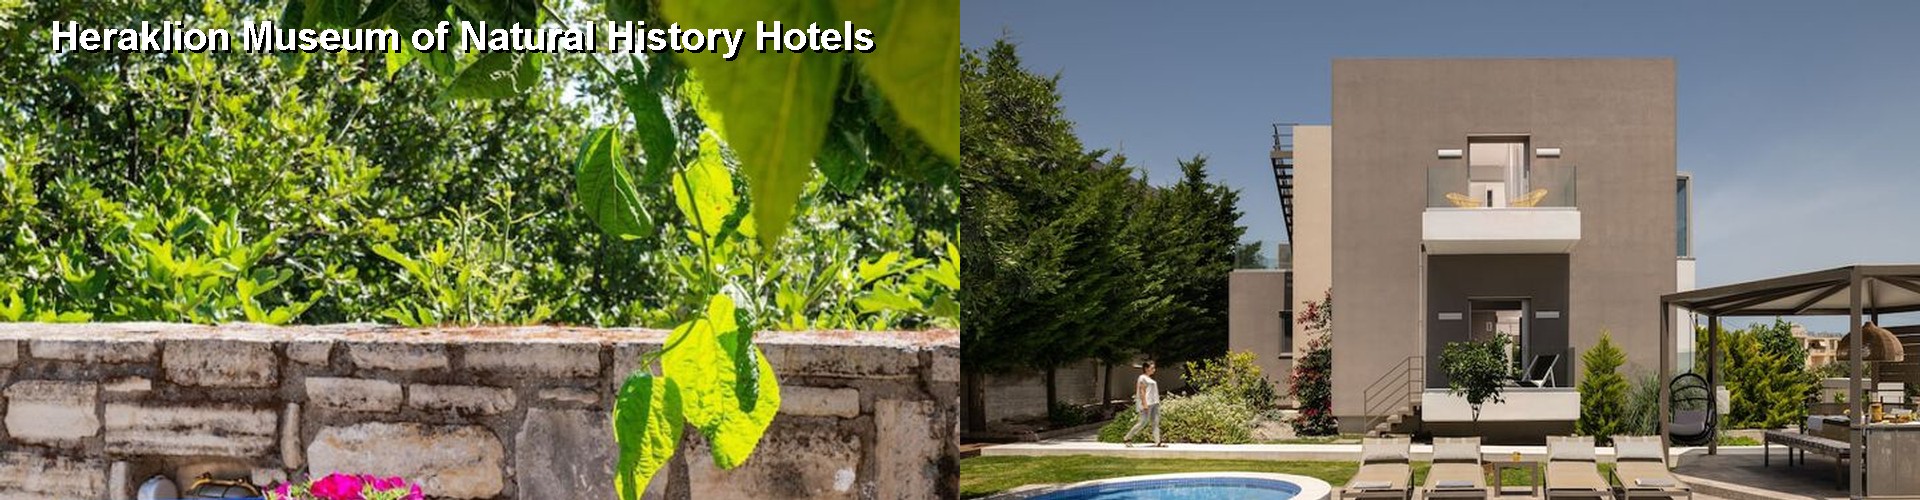 5 Best Hotels near Heraklion Museum of Natural History